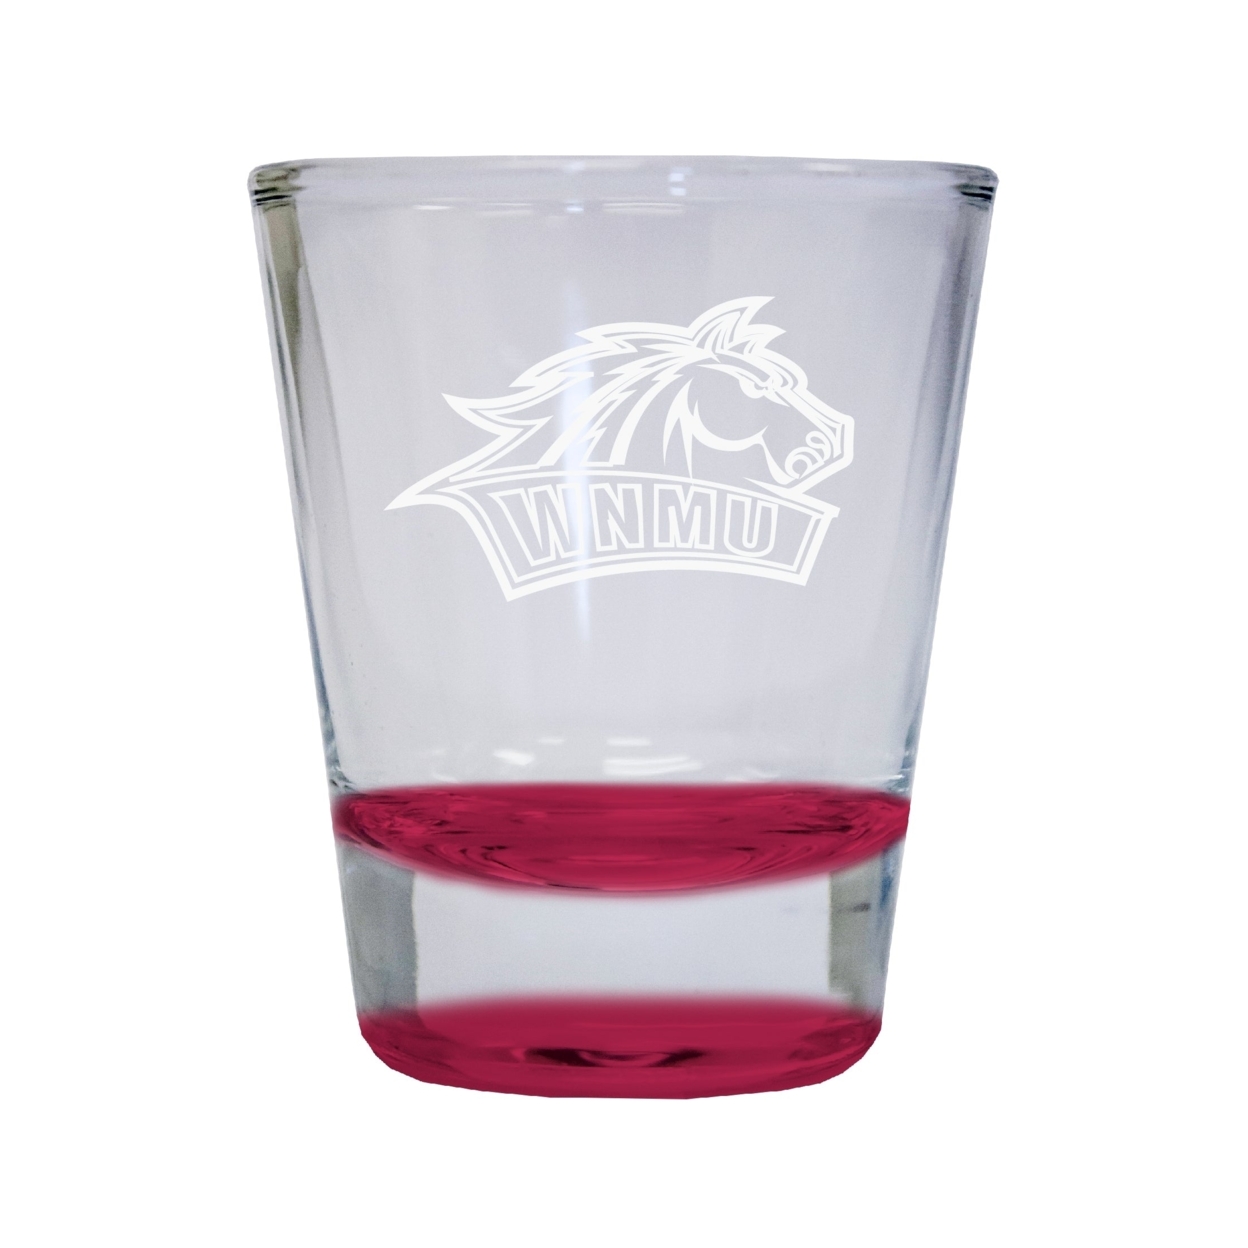 Western New Mexico University Etched Round Shot Glass 2 Oz Red